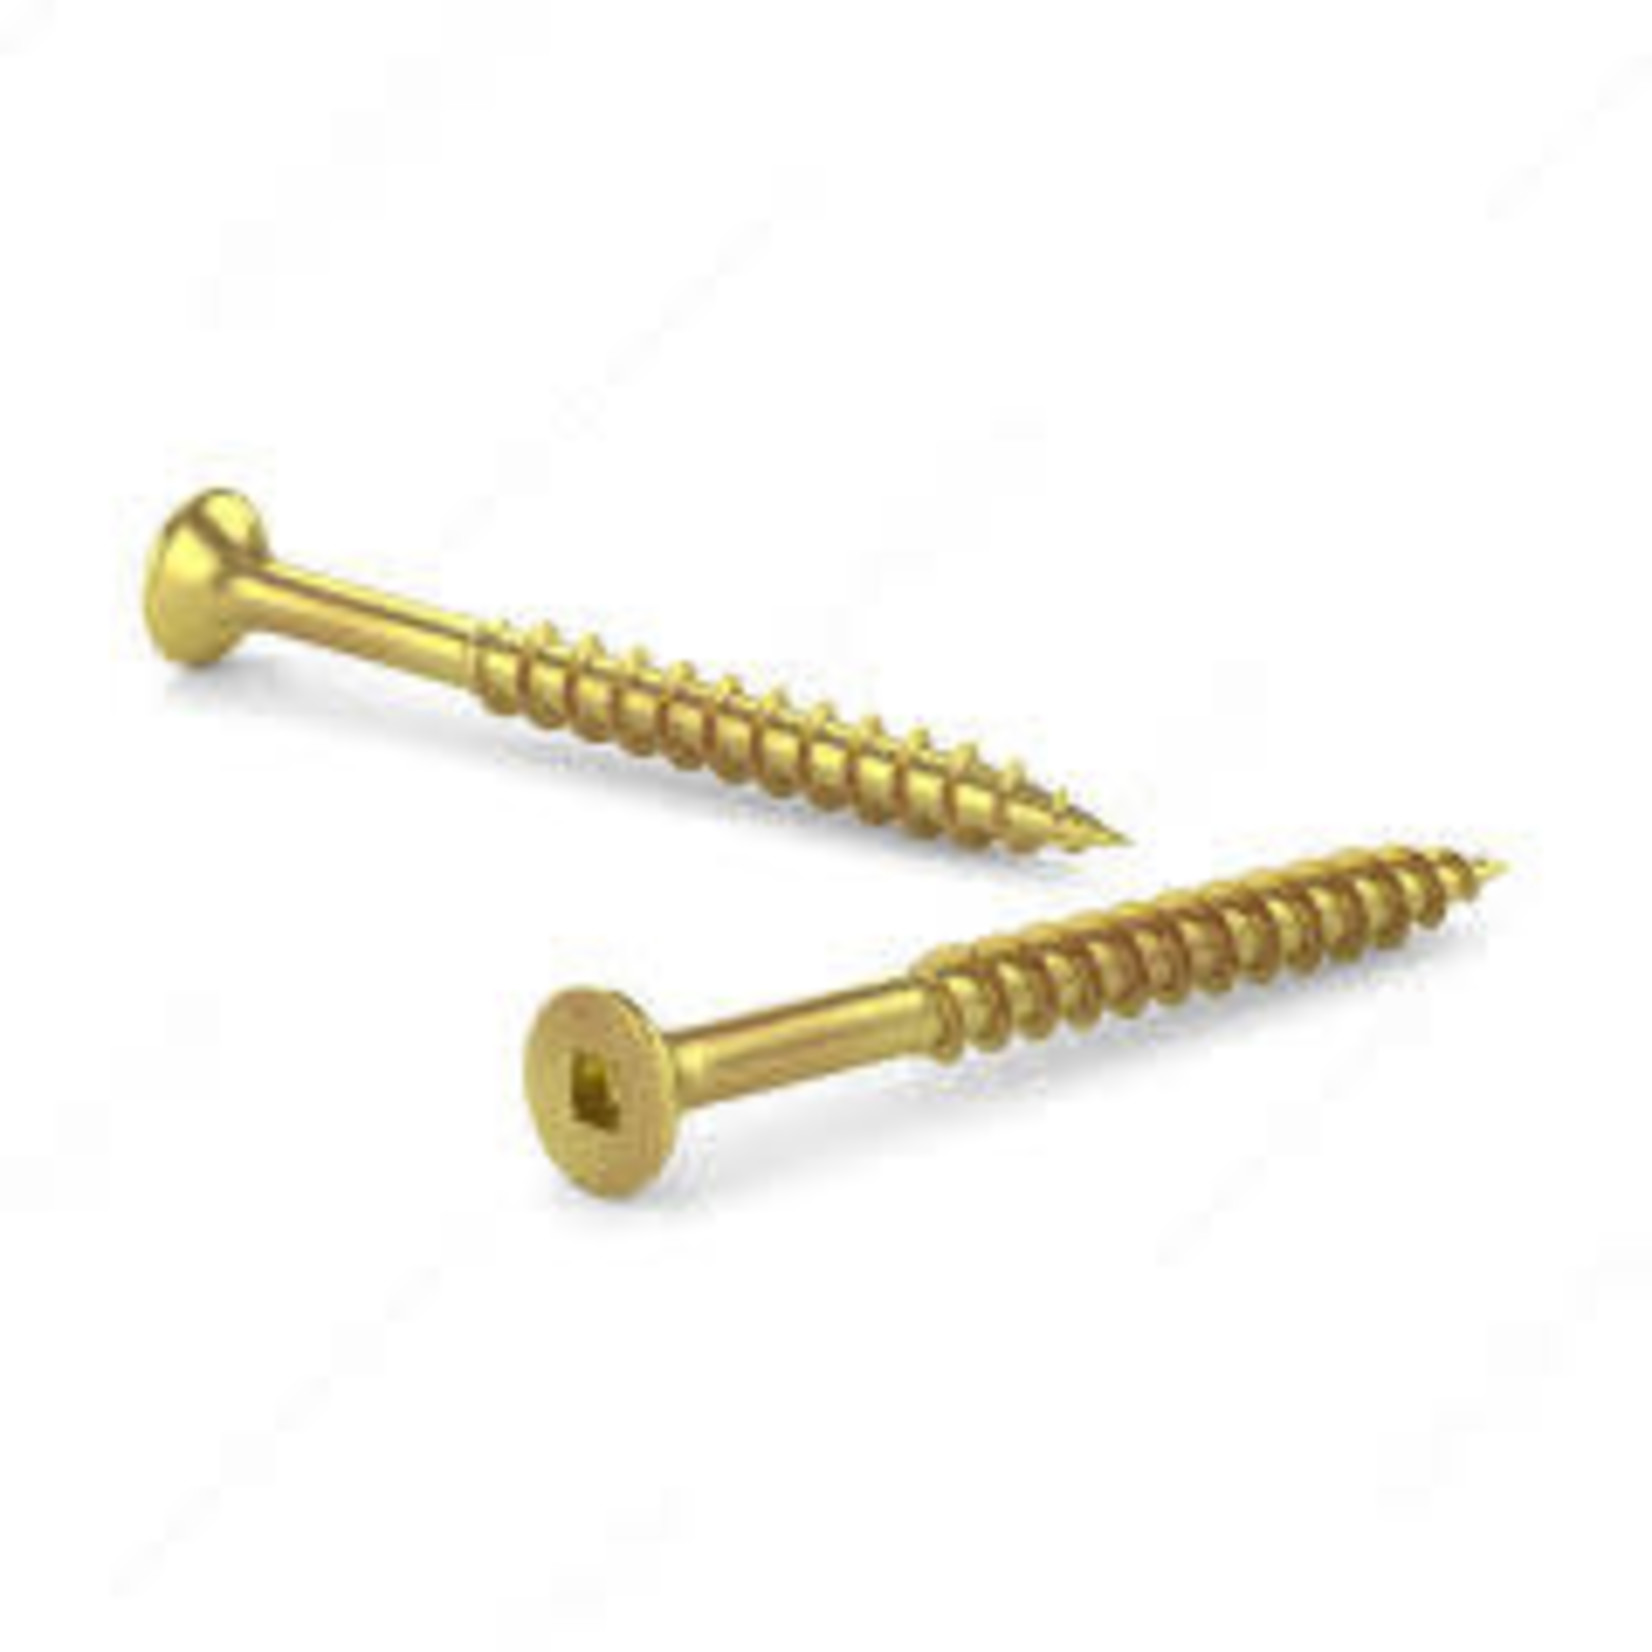 RELIABLE ALL PURPOSE YELLOW ZINC SCREW, #8 3IN, 2000PK